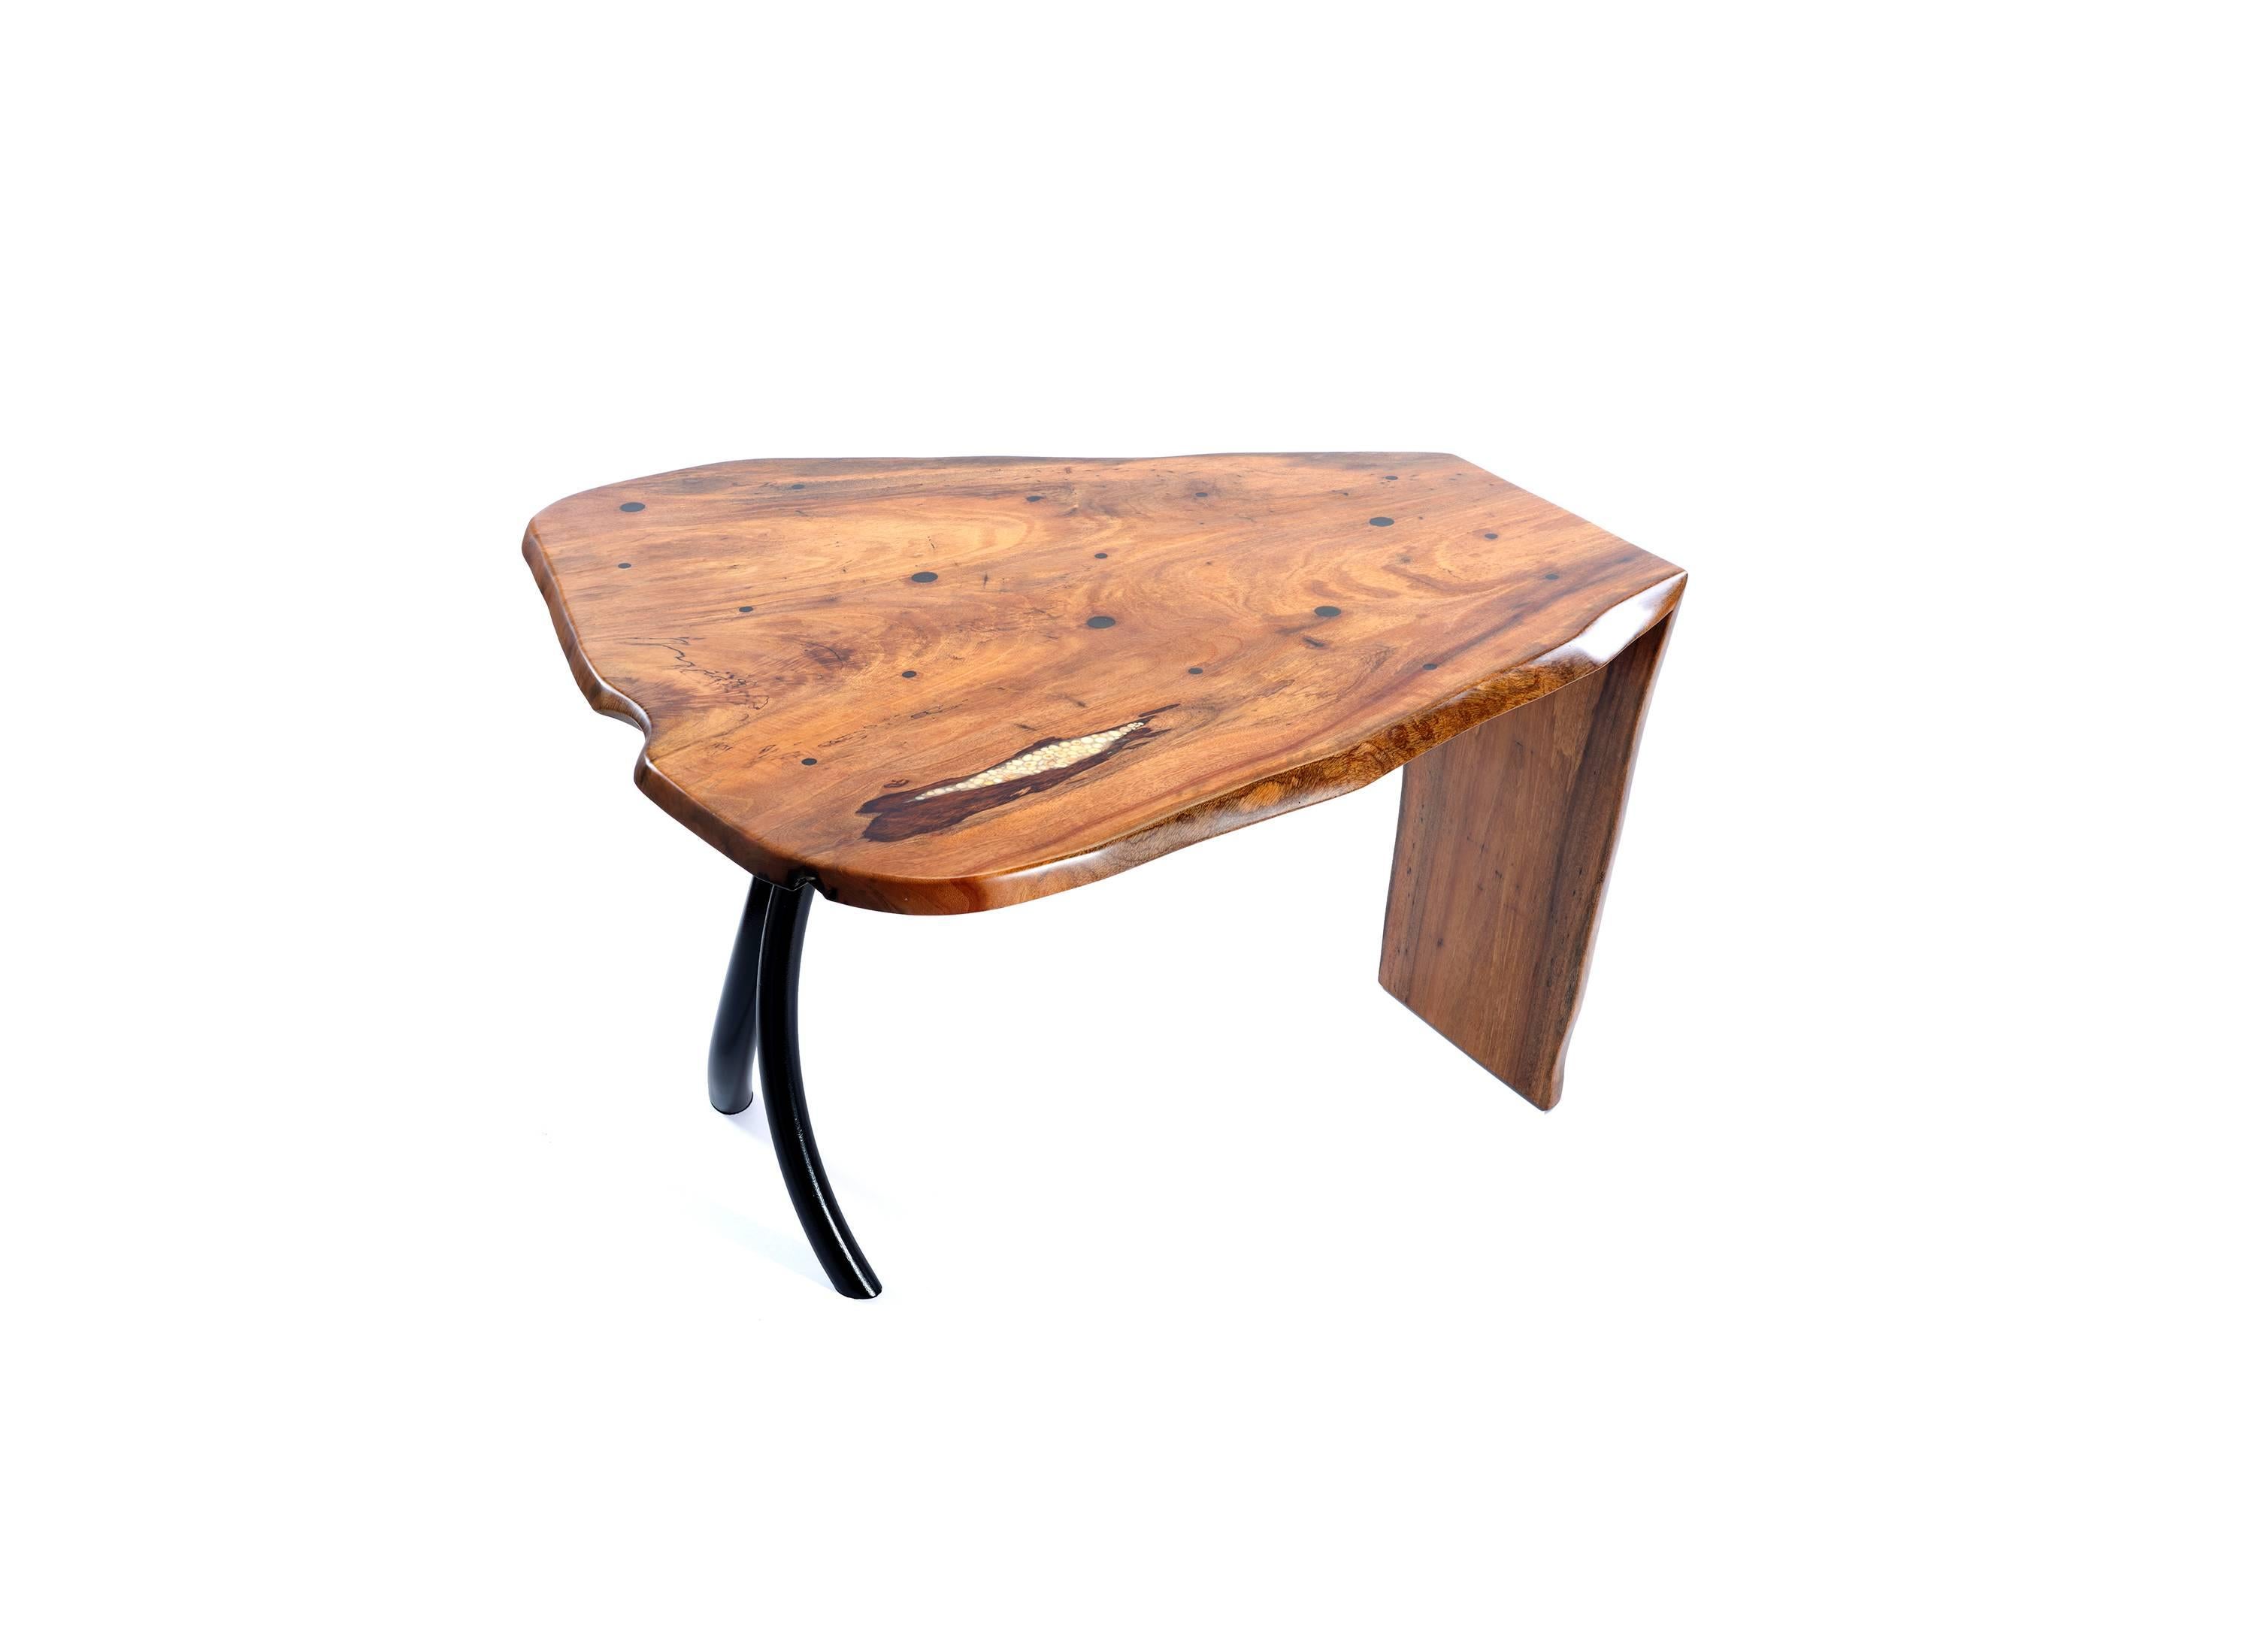 American Contemporary Table in Mango Wood, Pearls and Forged Steel by Steve Tobin